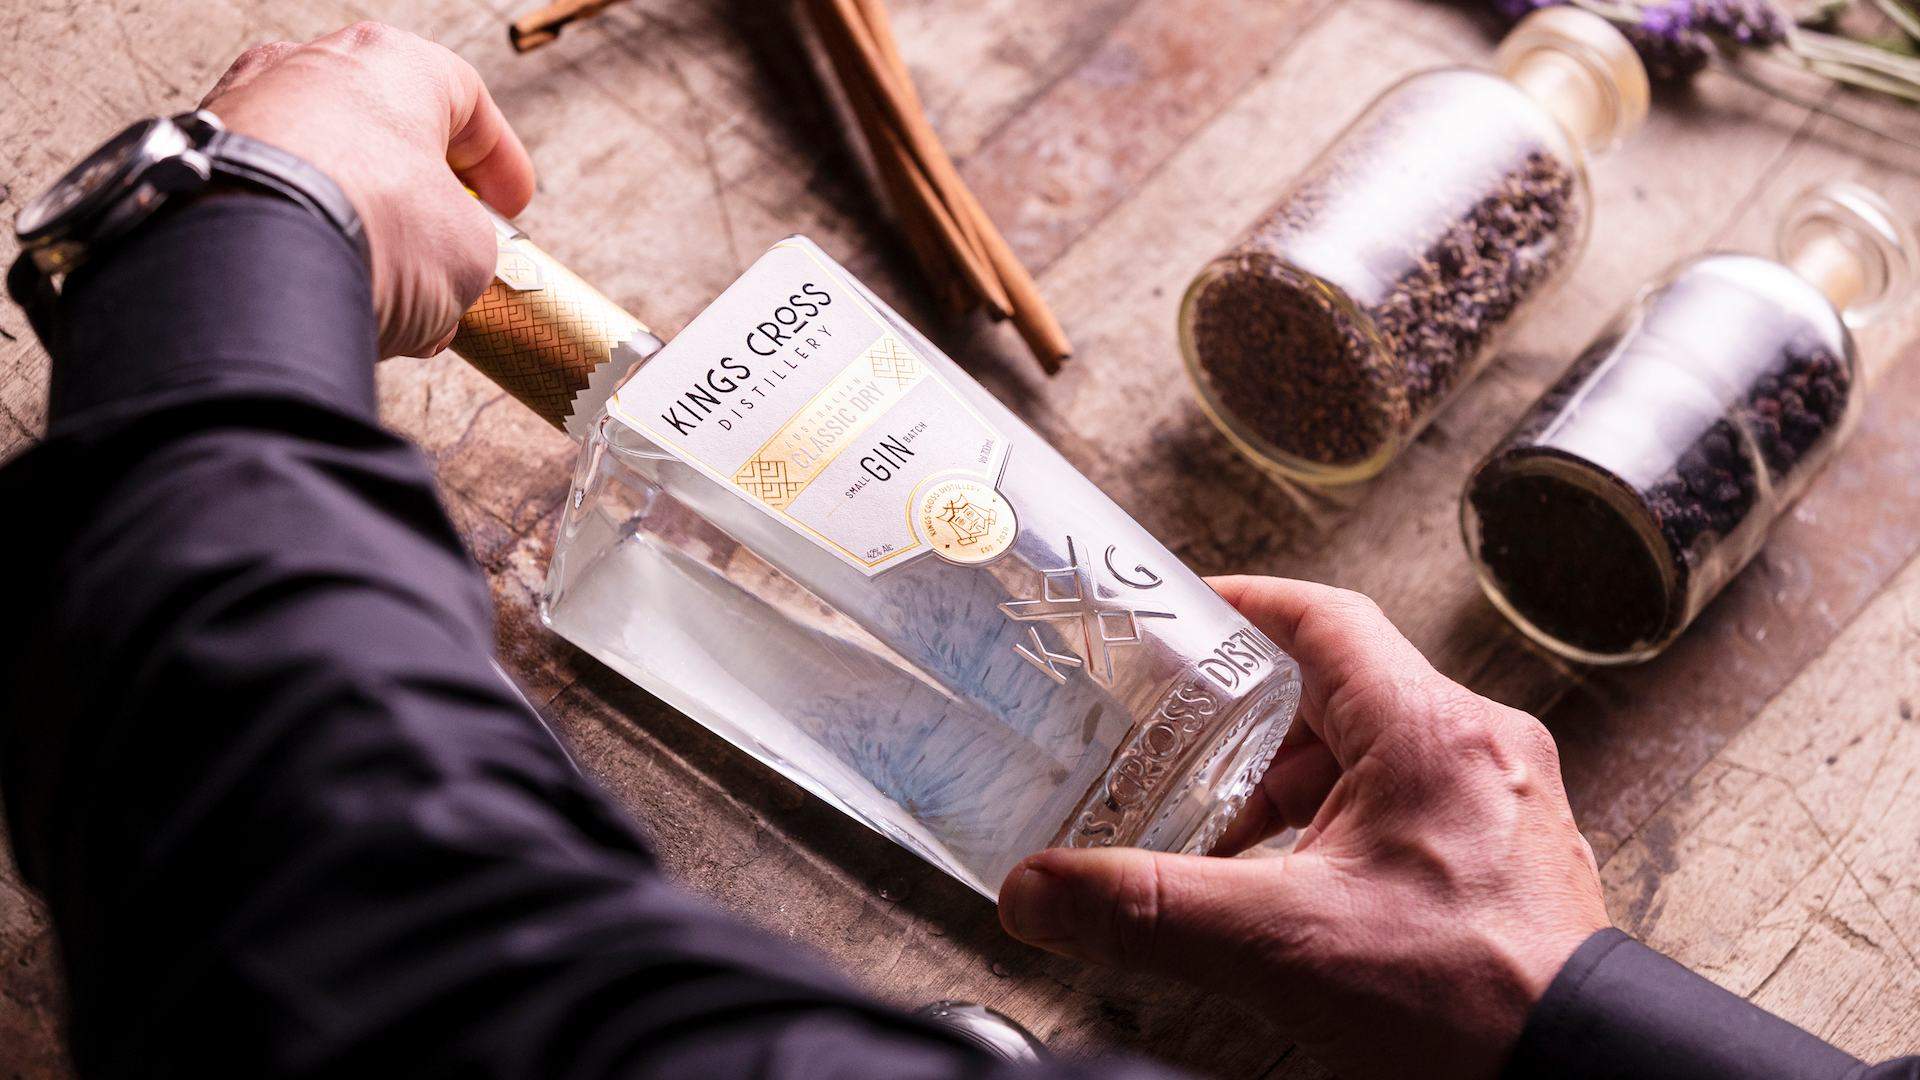 A New Gin Distillery and Bar Is Opening Inside a Former Adult Bookstore in Kings Cross